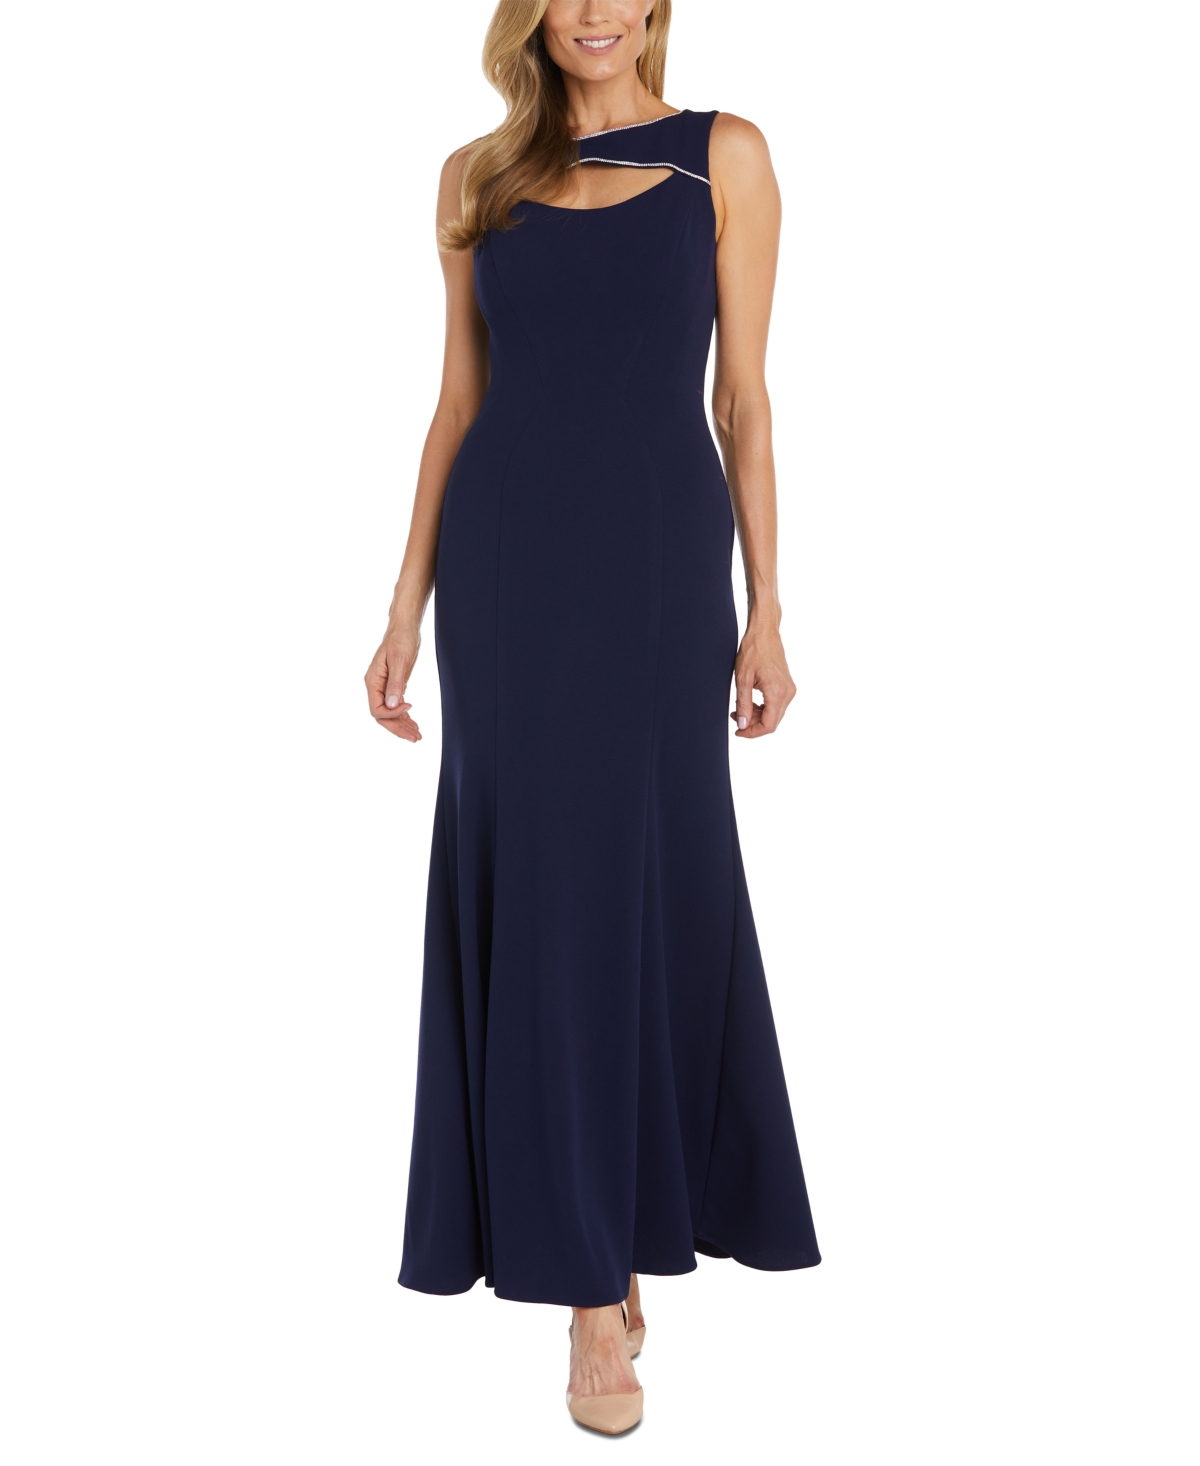 Nigthtway Women's Embellished Cutout Gown - Navy